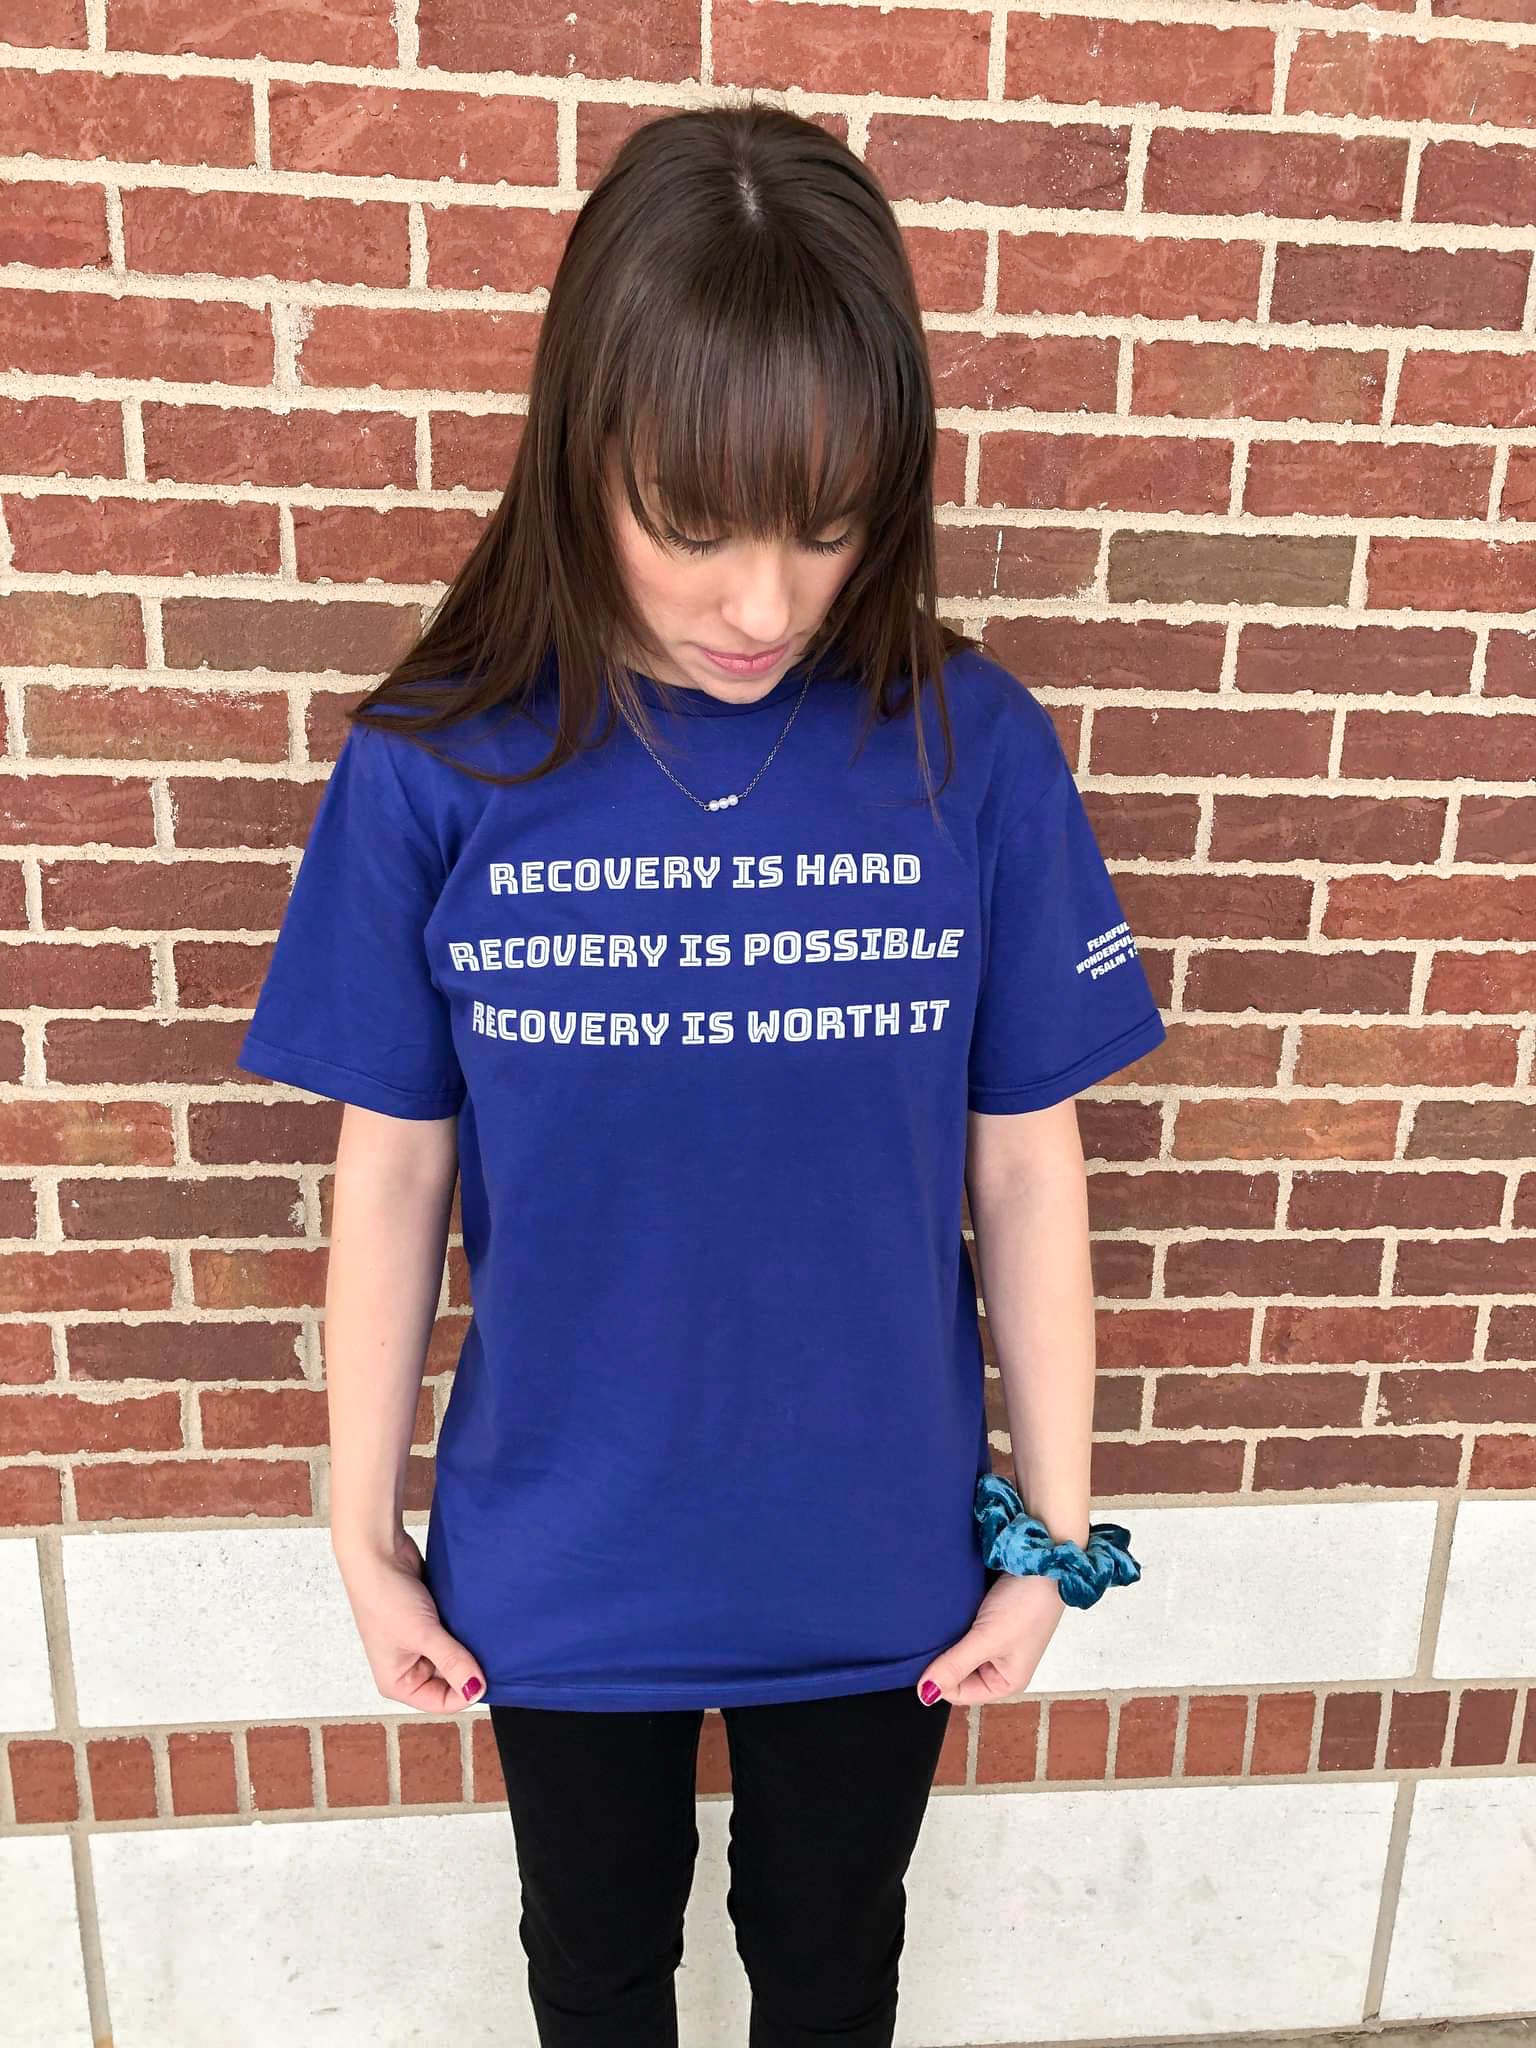 Recovery Is Worth It Tees Christian Eating Disorder Recovery NEDA